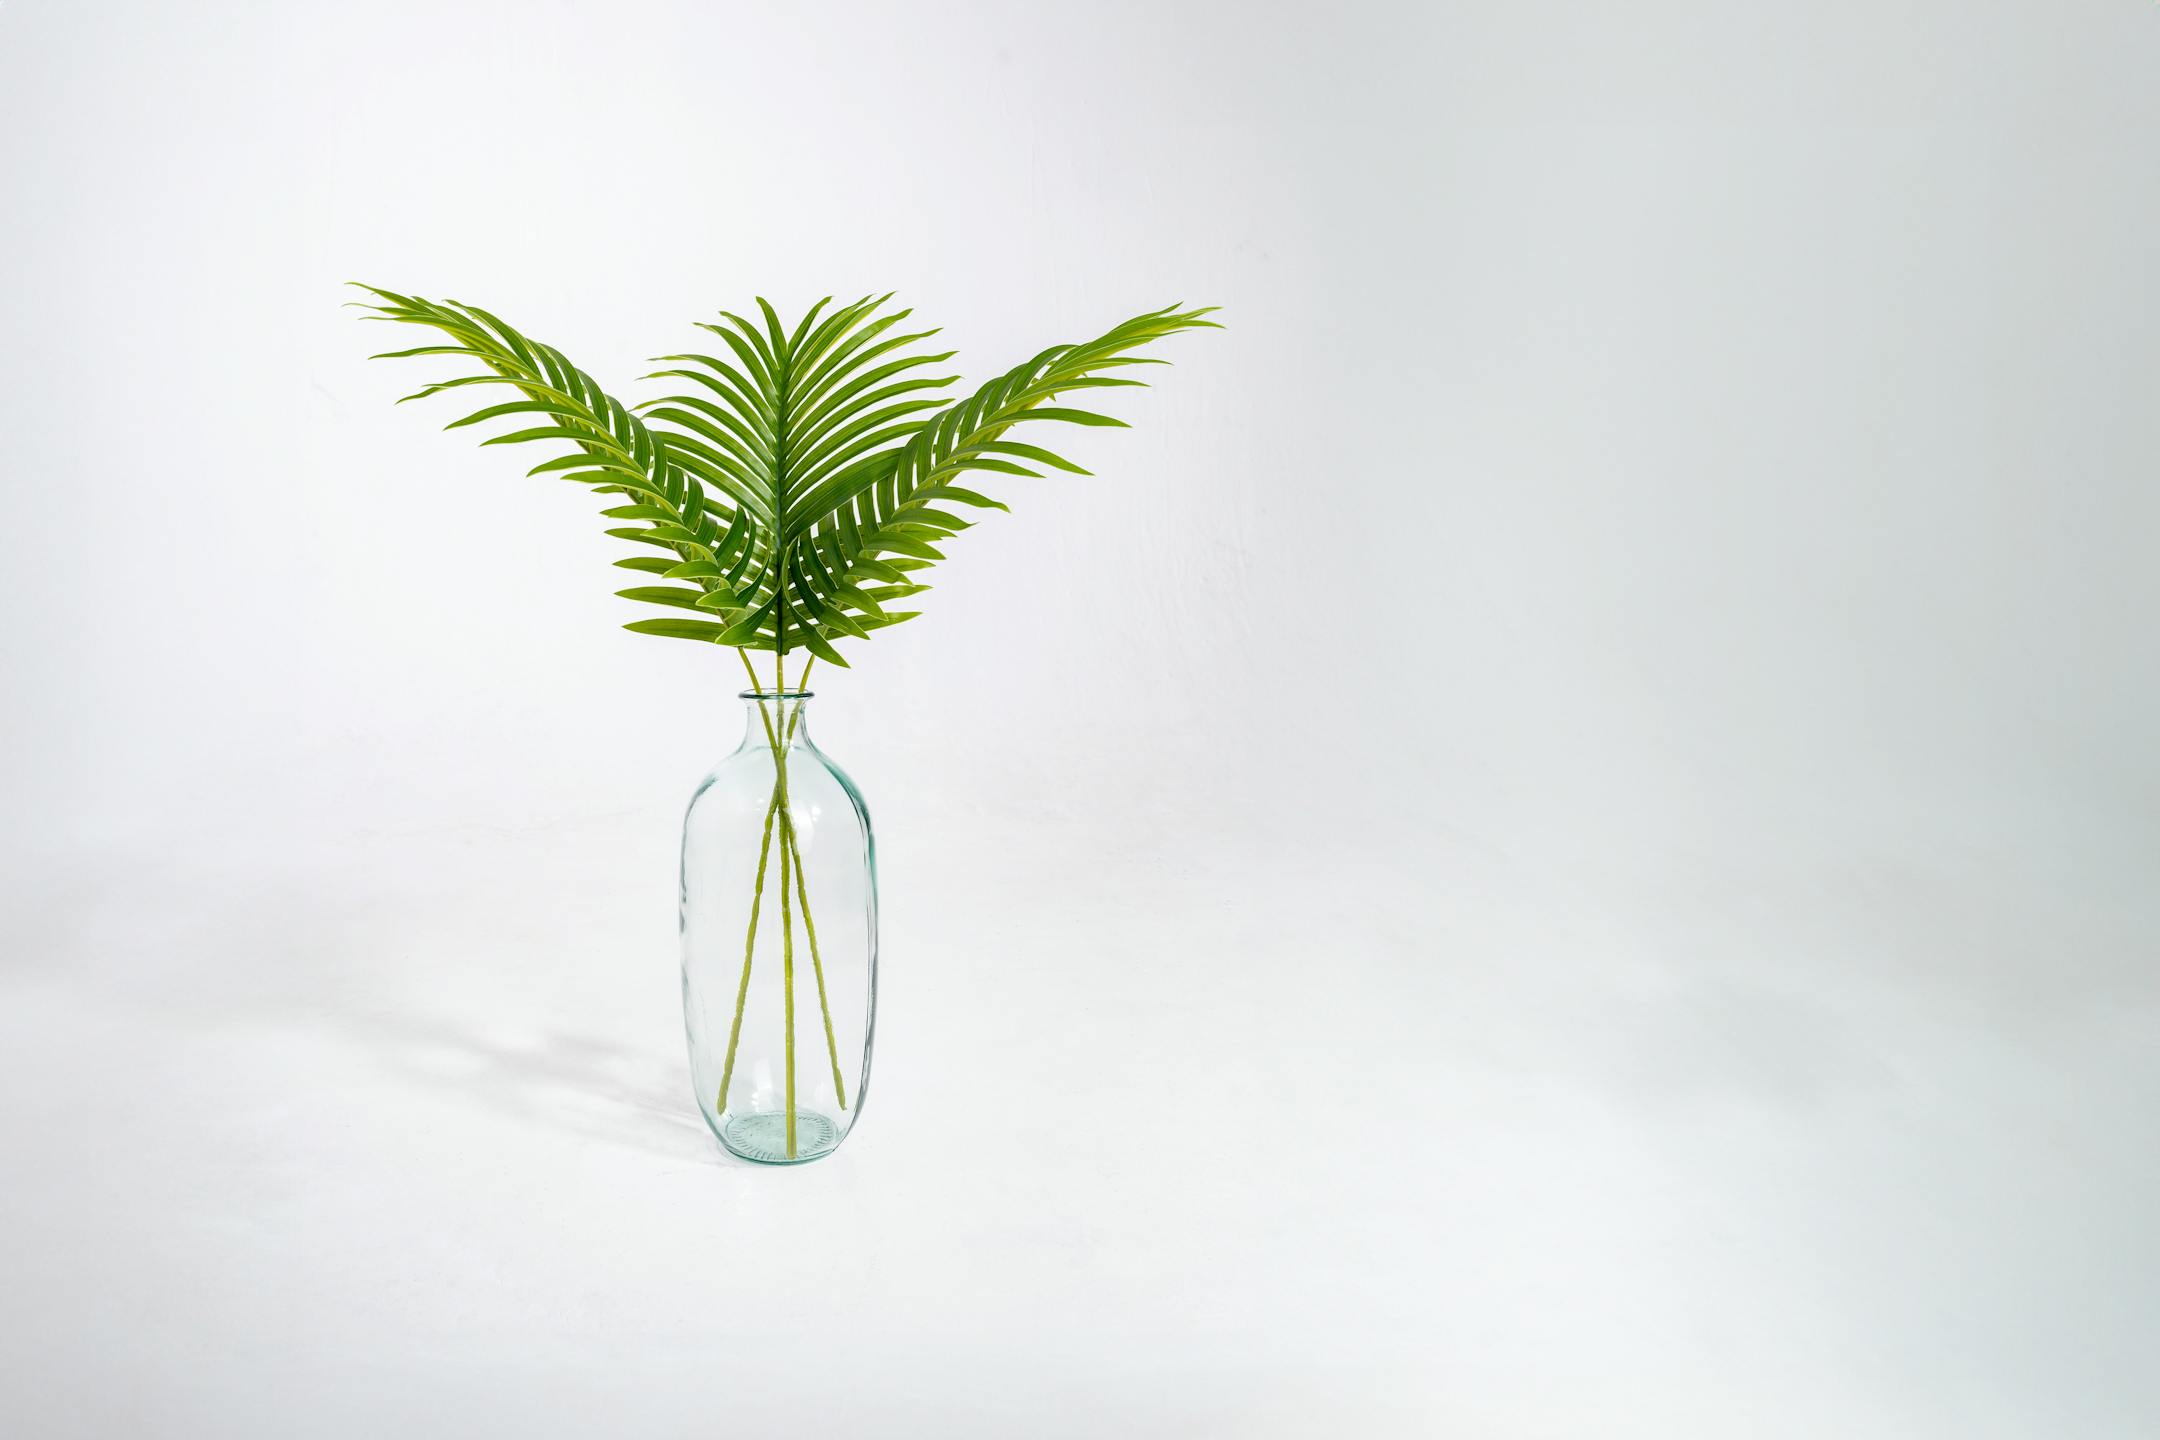 Three artificial paradise leaf stems in glass vase